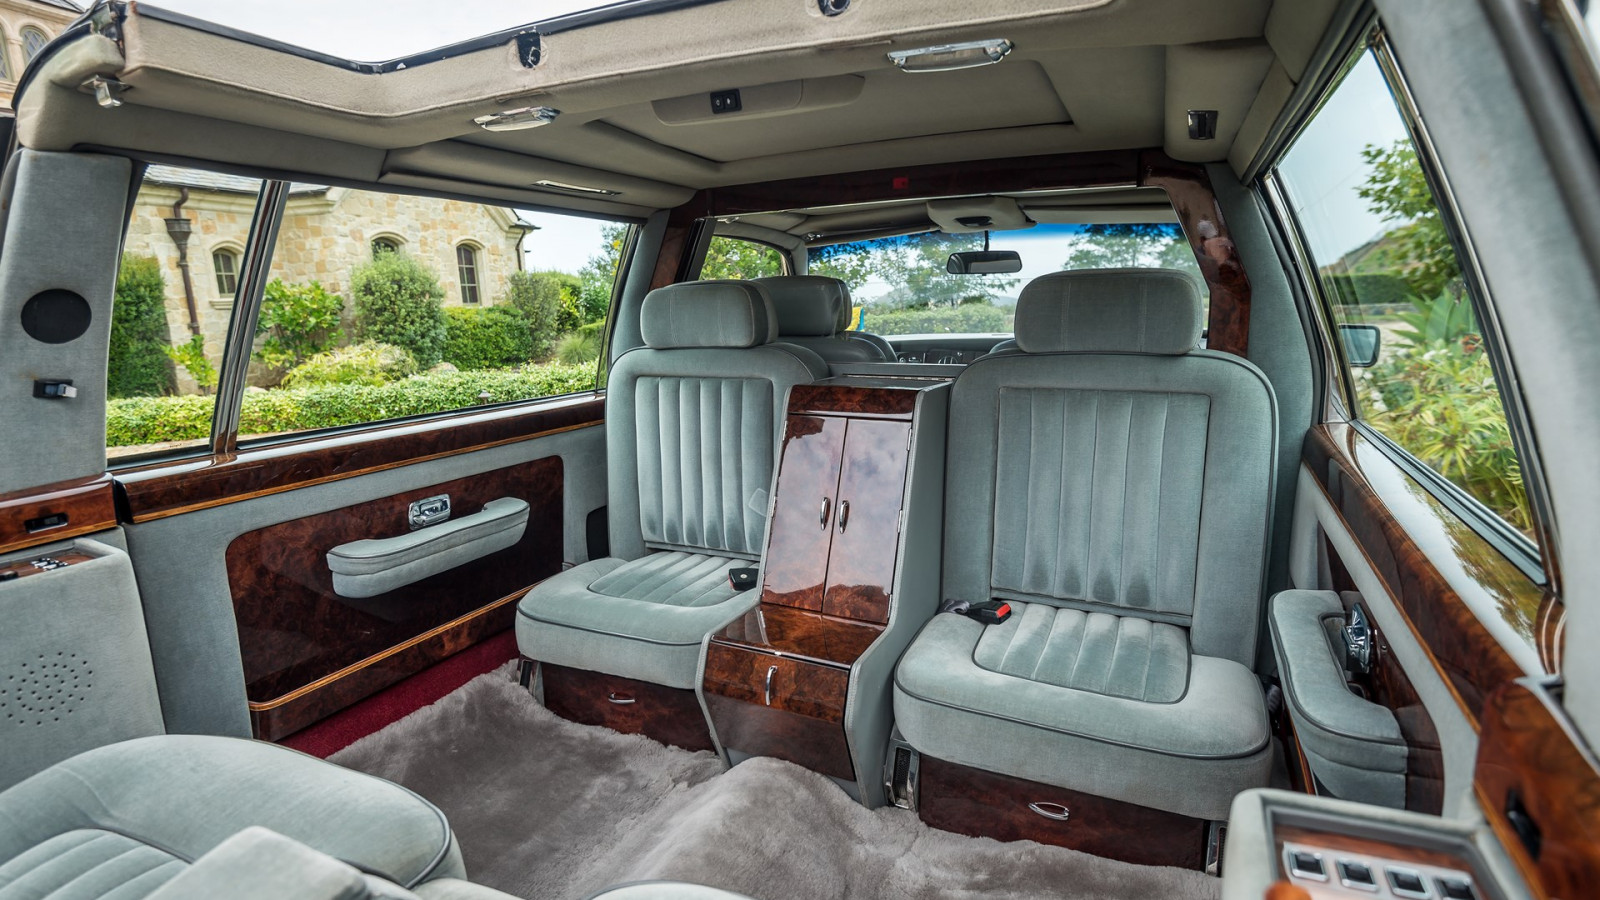 King of the limos: this bespoke Rolls-Royce will blow your mind